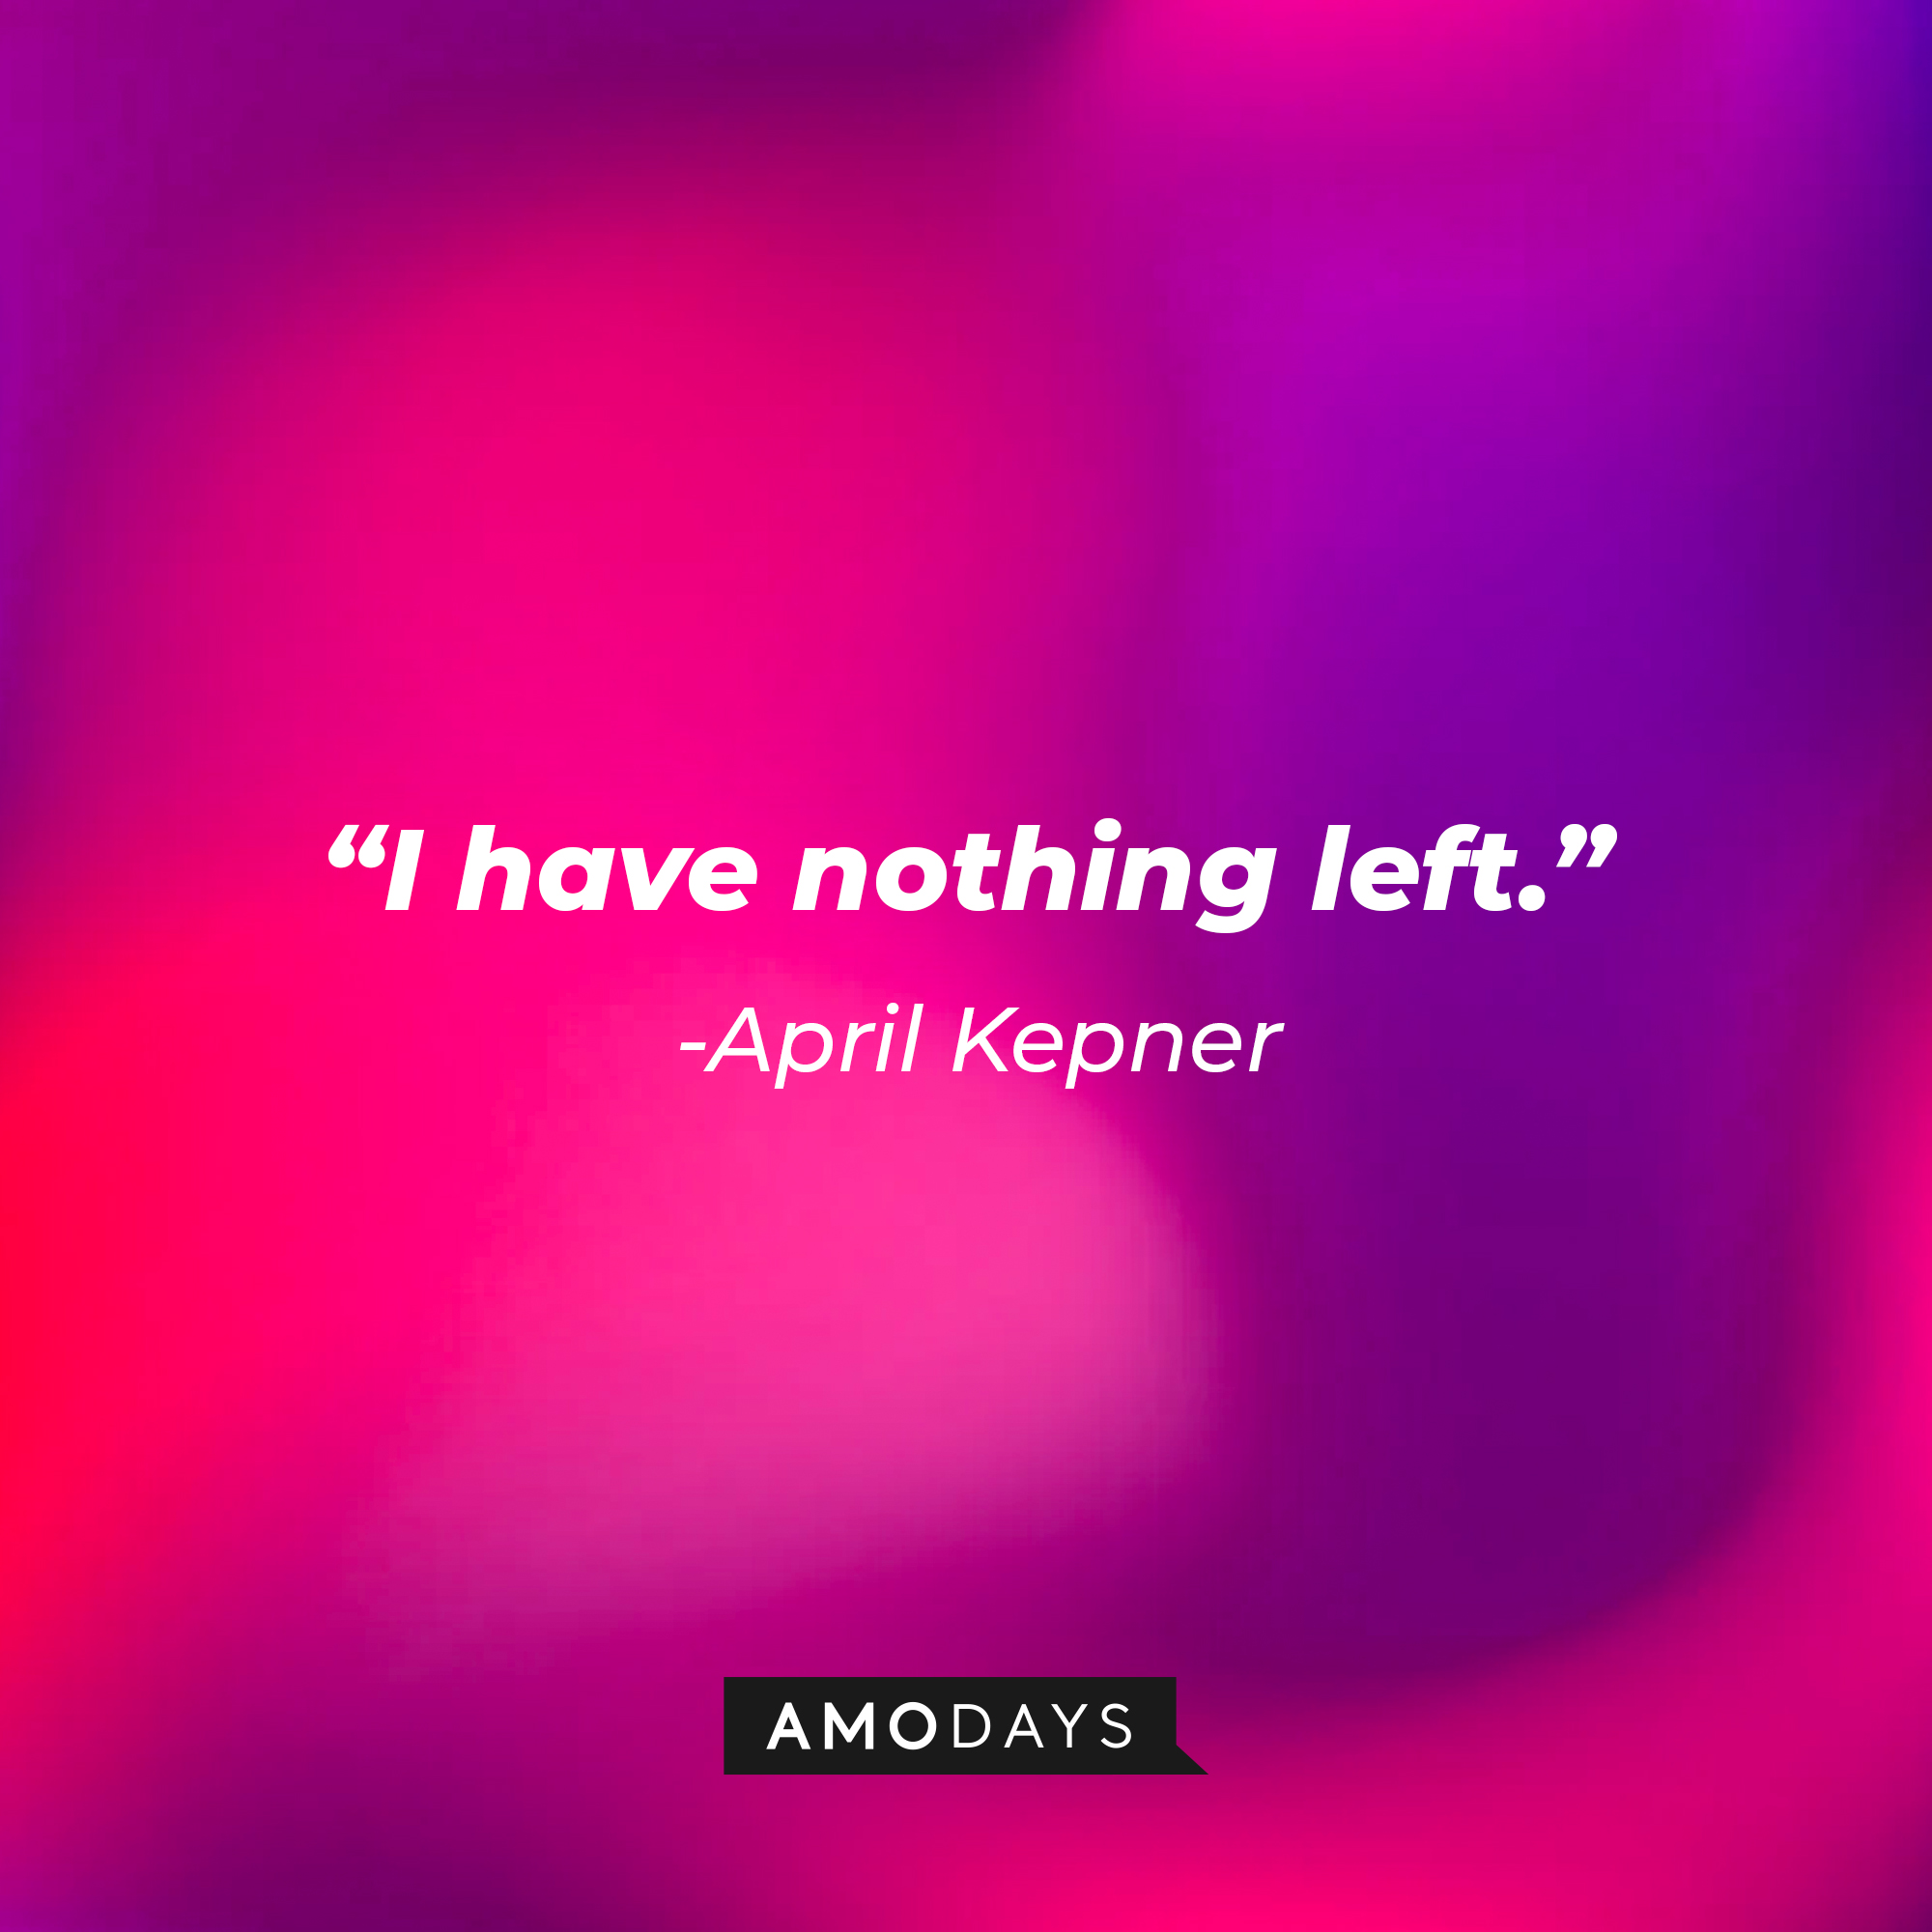 April Kepner's quote: "I have nothing left." | Source: AmoDays